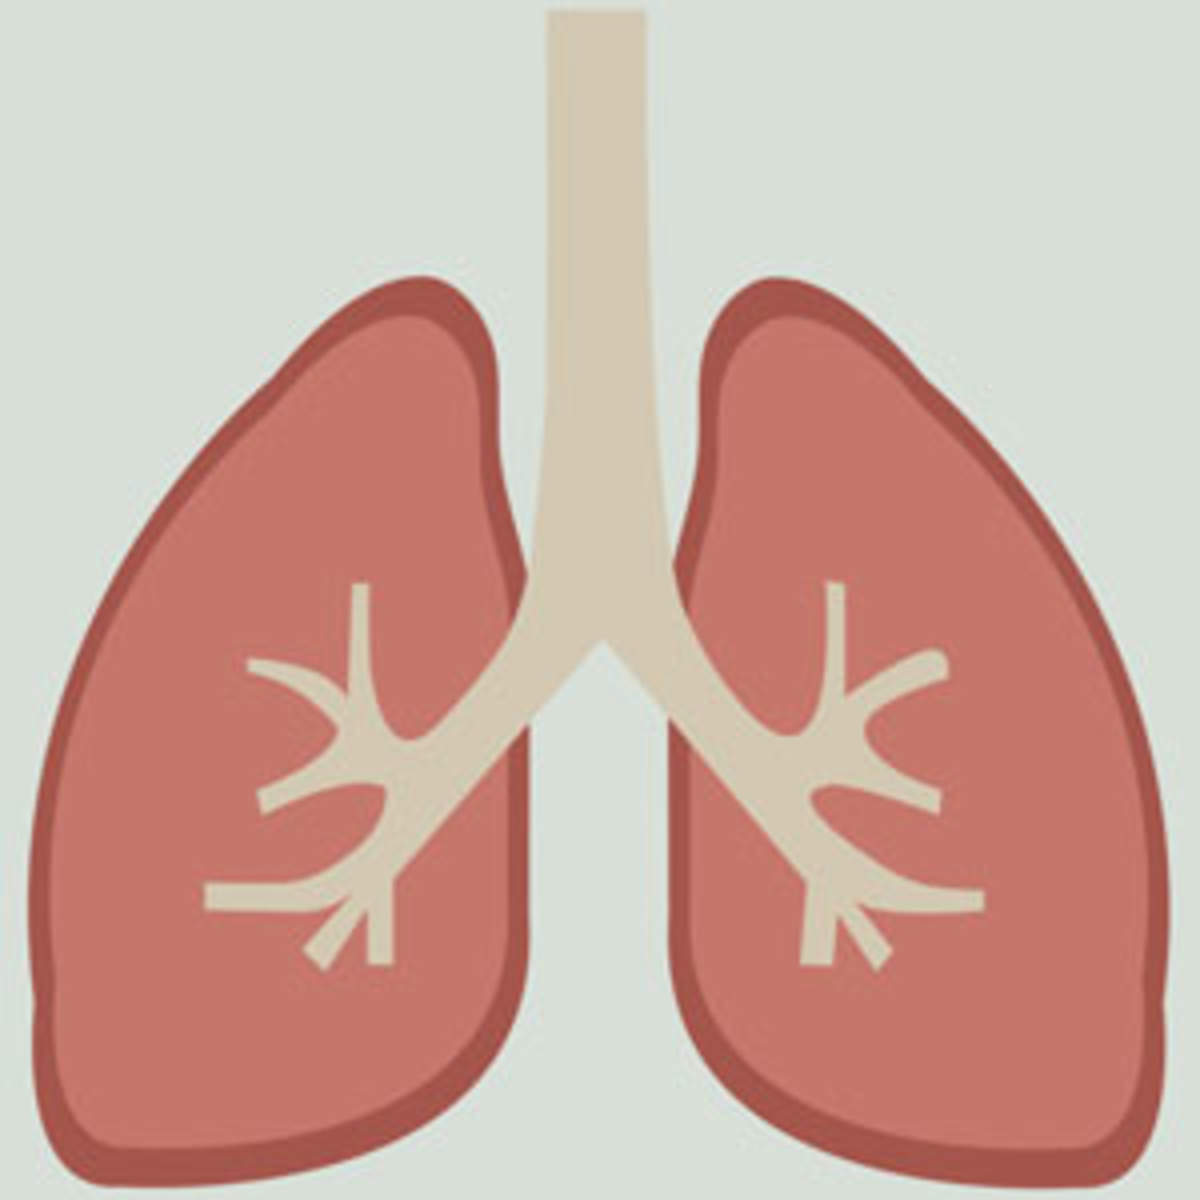 hiv and lung cancer risk)